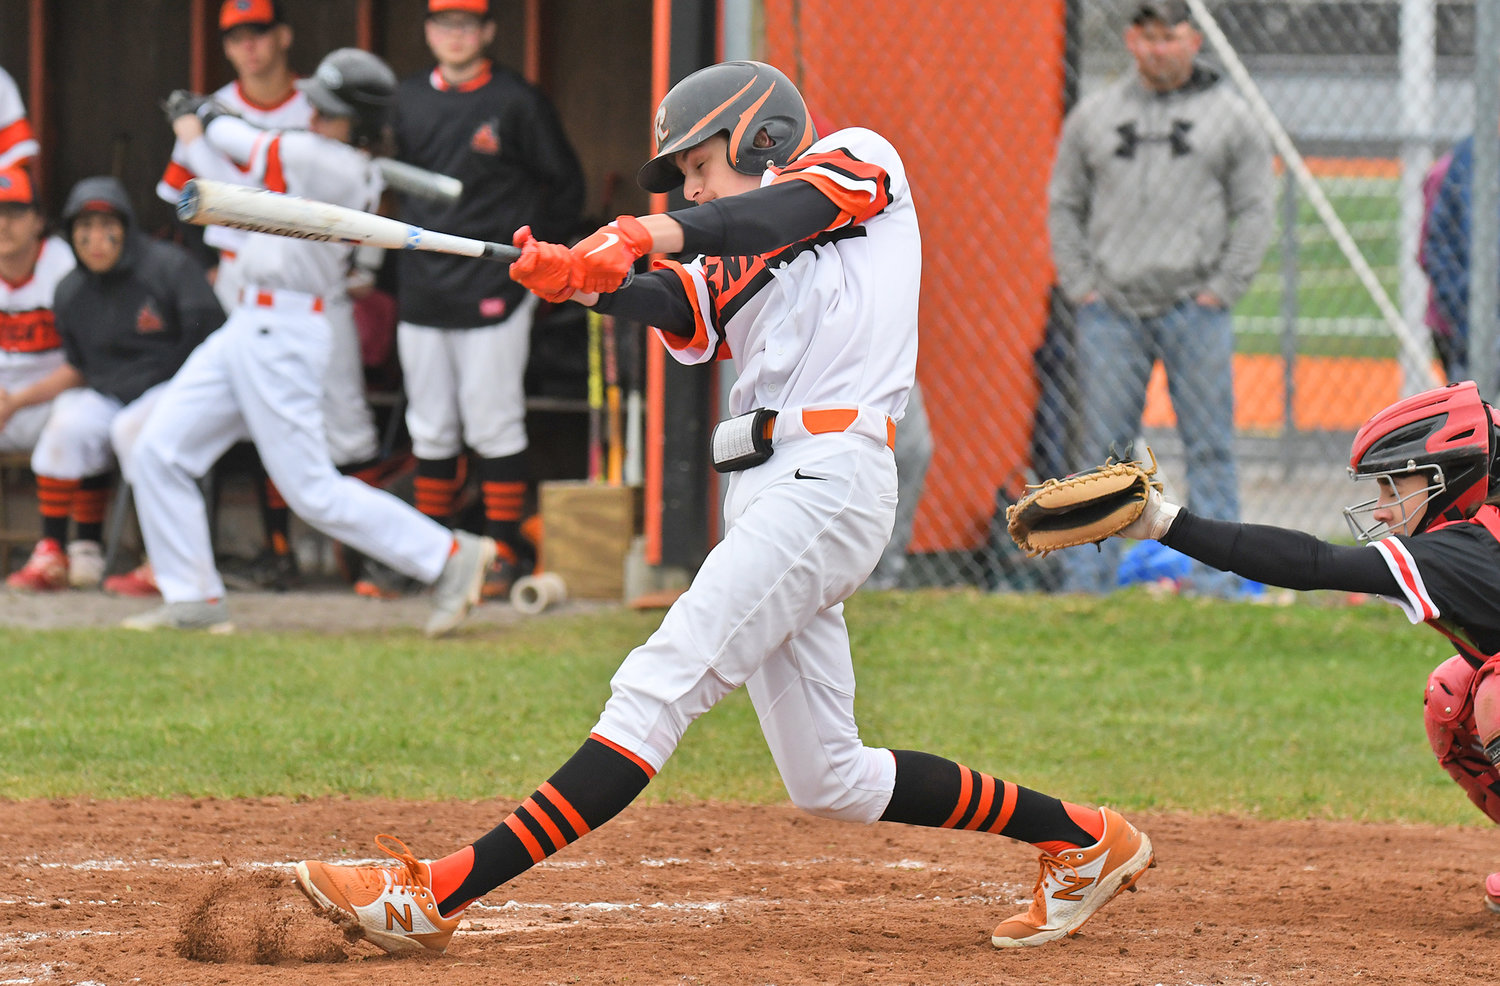 MAKING CONTACT — Rome Free Academy's John Sharrino connects with a pitch on Tuesday against Proctor in Rome. Proctor won 11-4 in six innings. The game was moved to Rome from Utica's Murnane Field because the field was not in playable conditions.